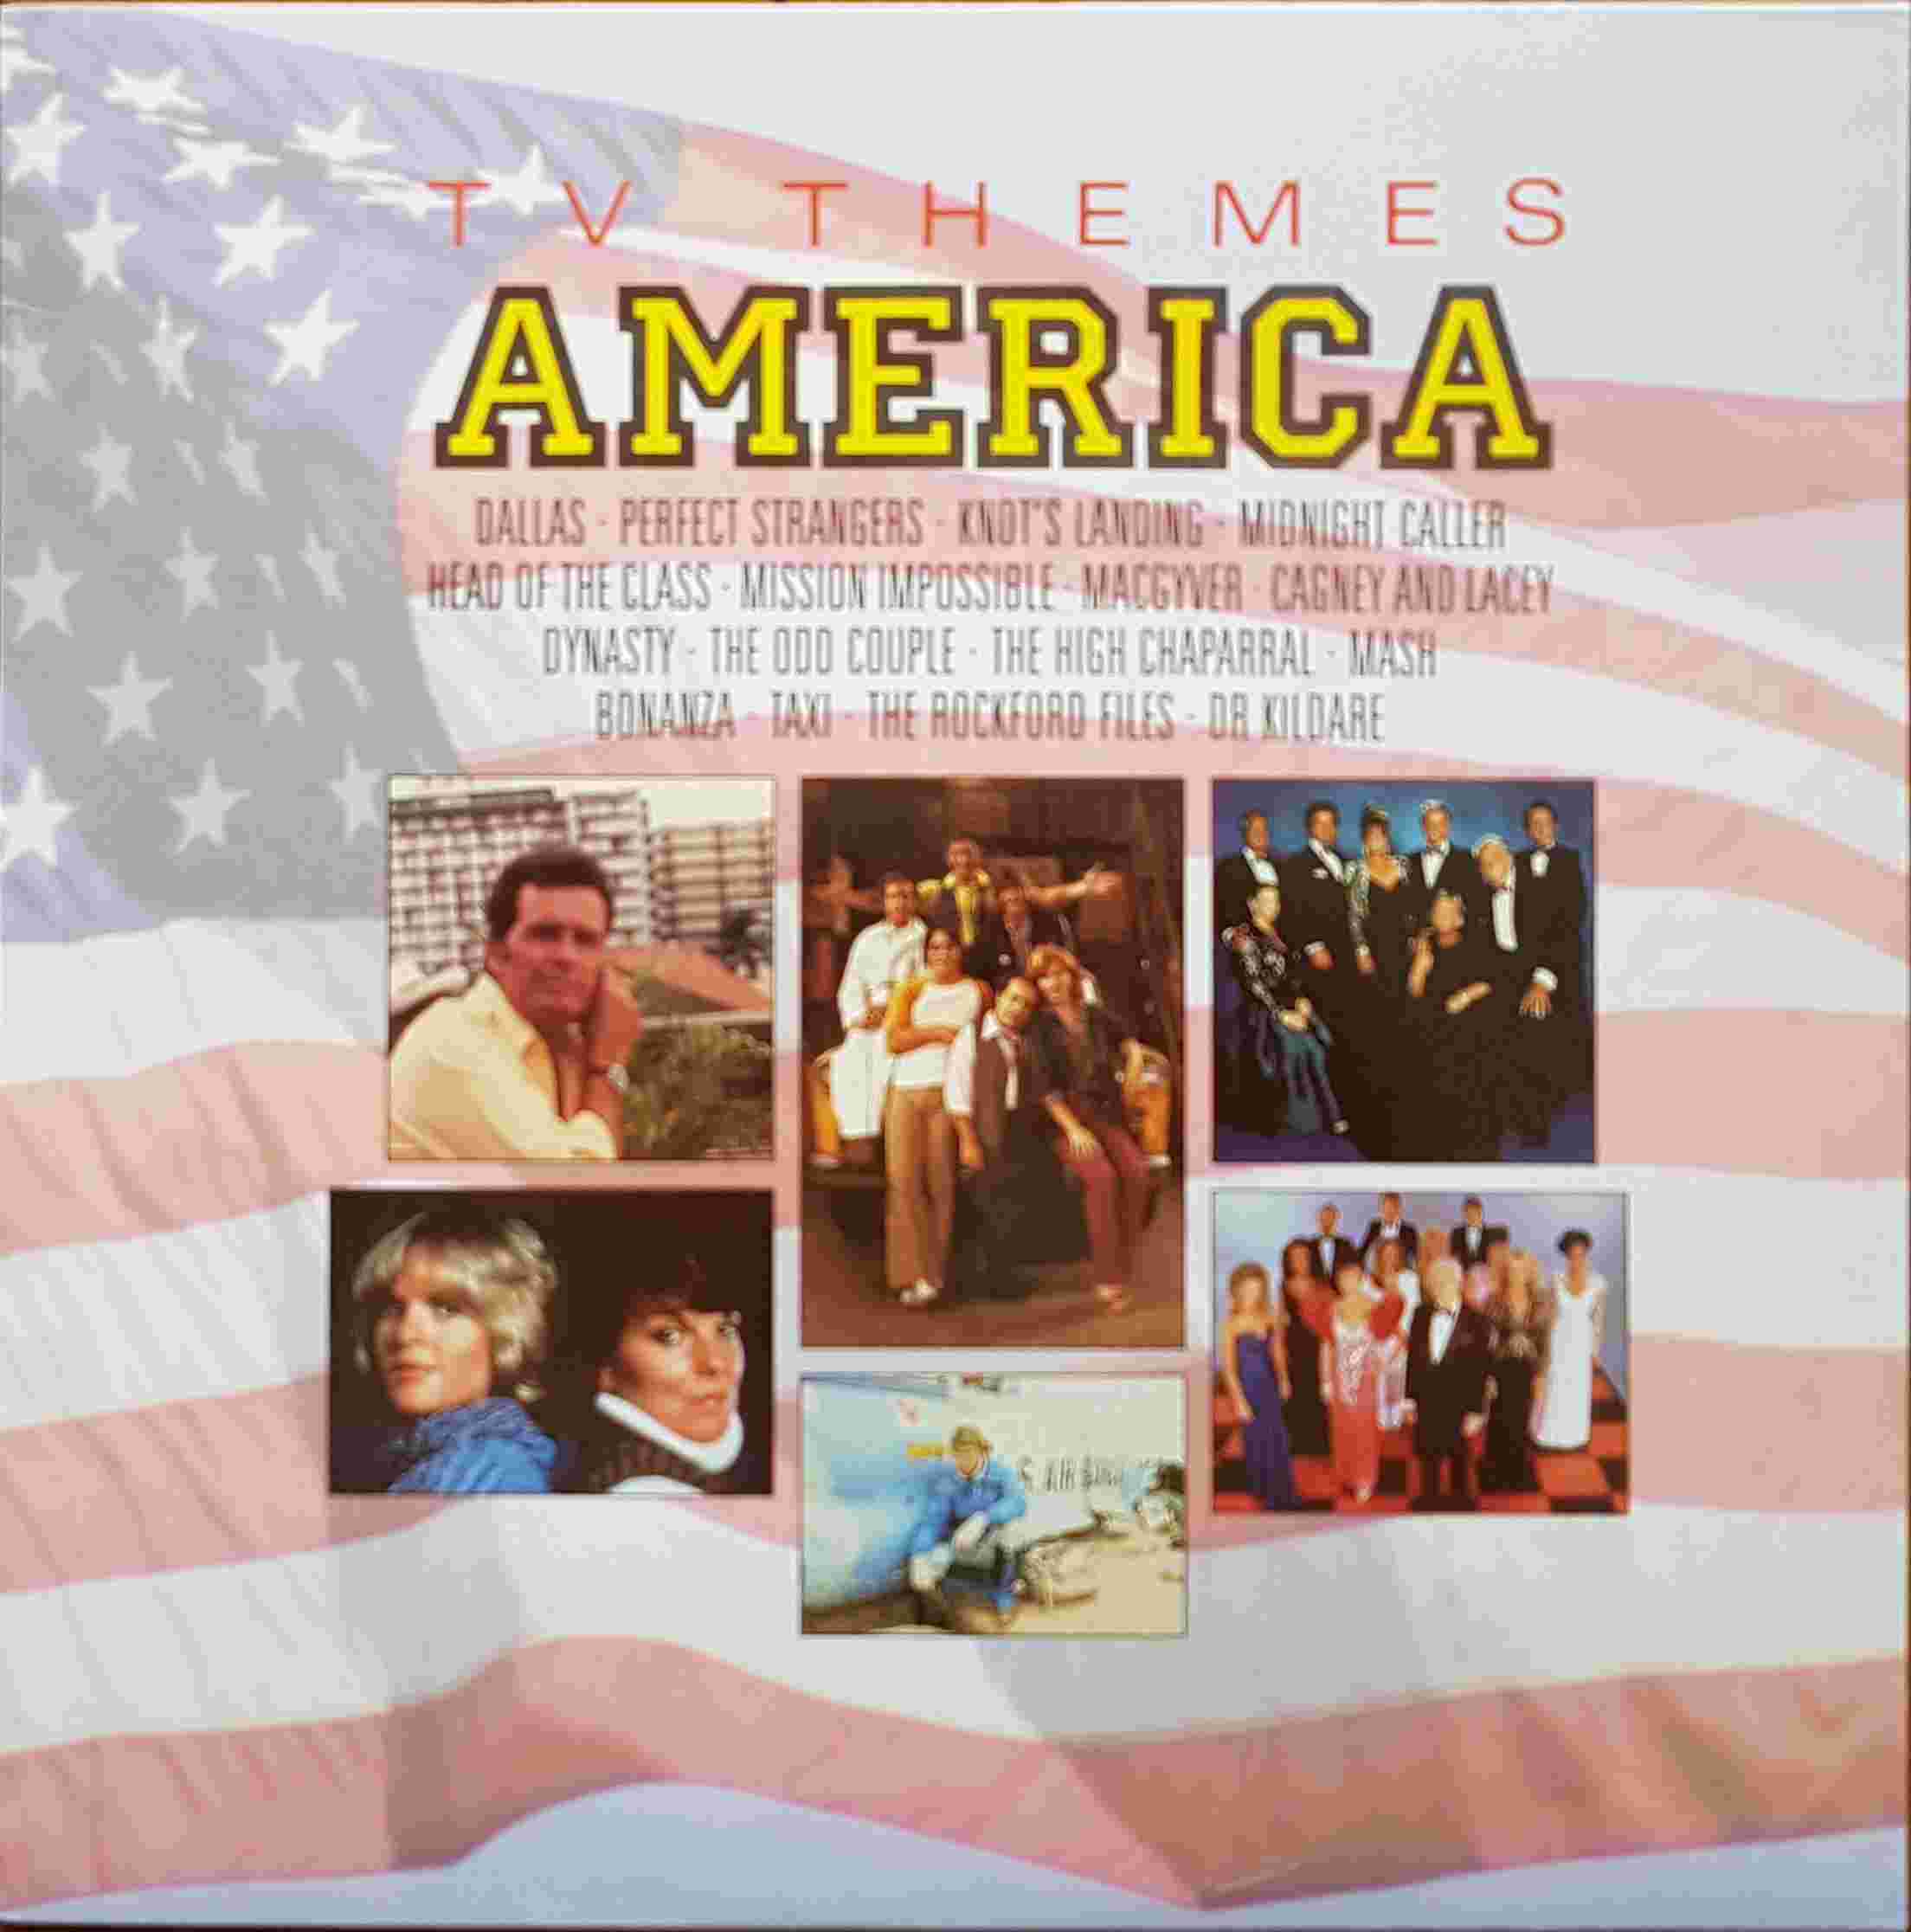 Picture of REB 763 TV themes - America by artist Various from the BBC albums - Records and Tapes library